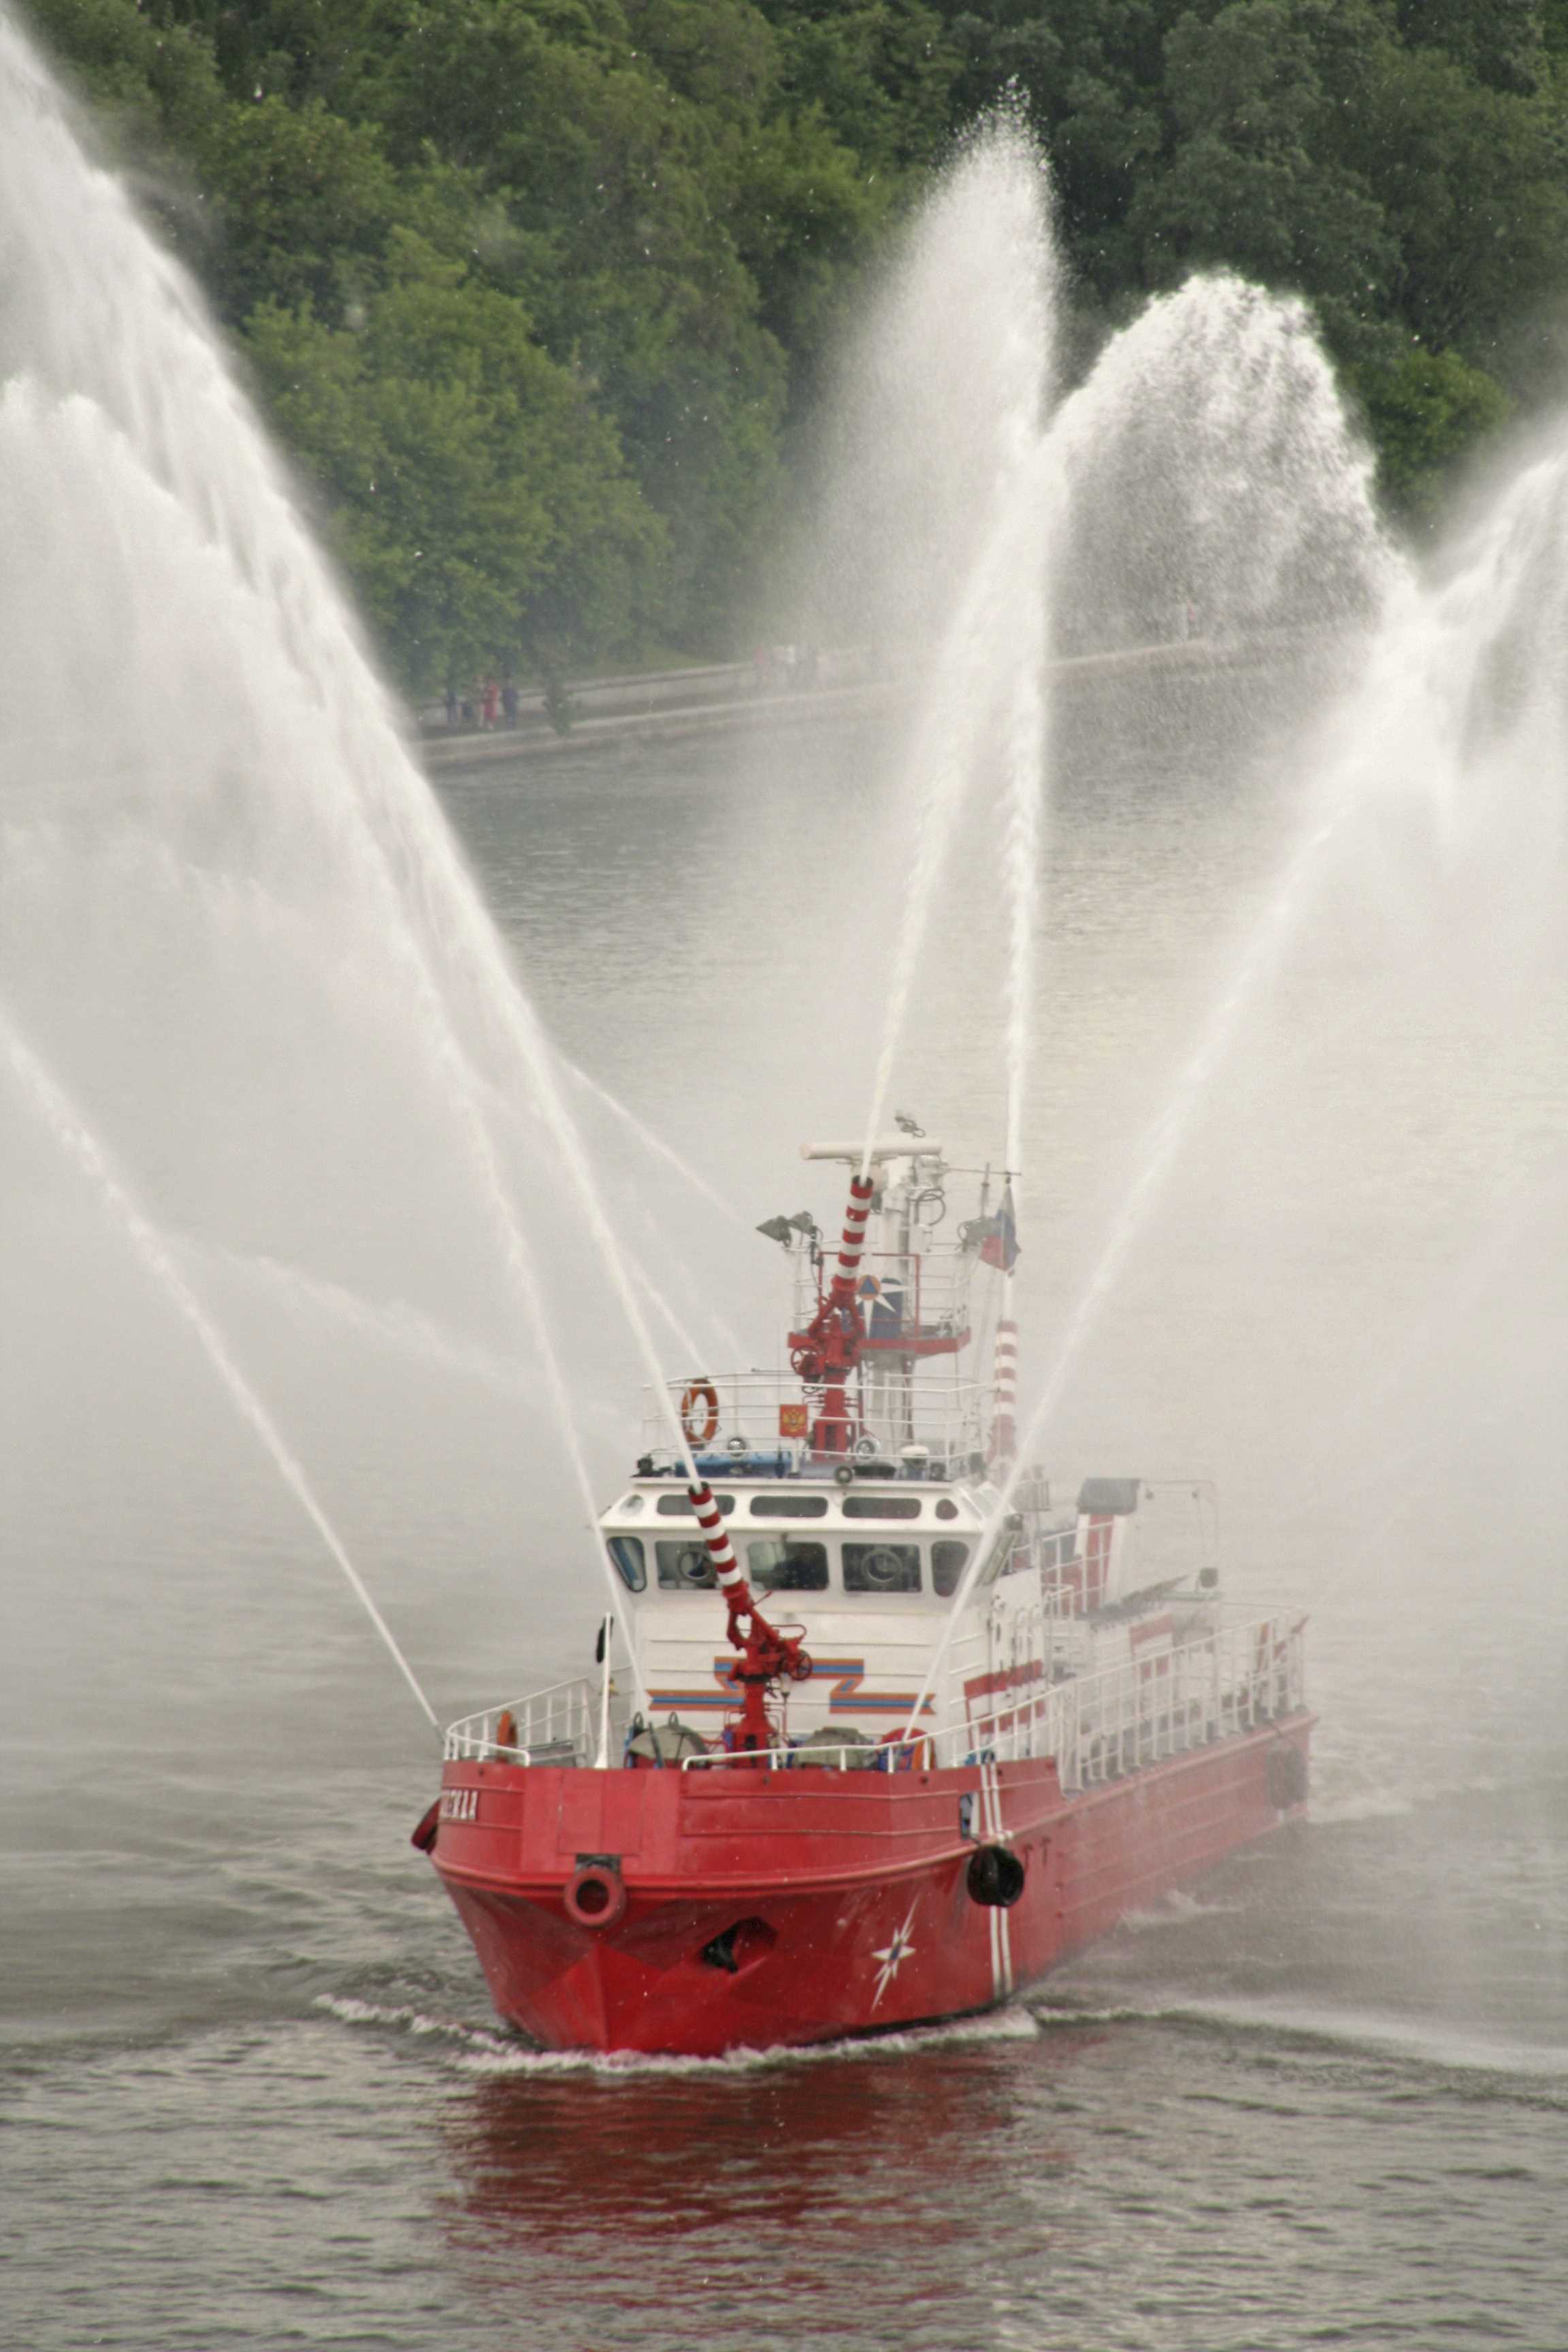 Boat Fire Safety Week 2015